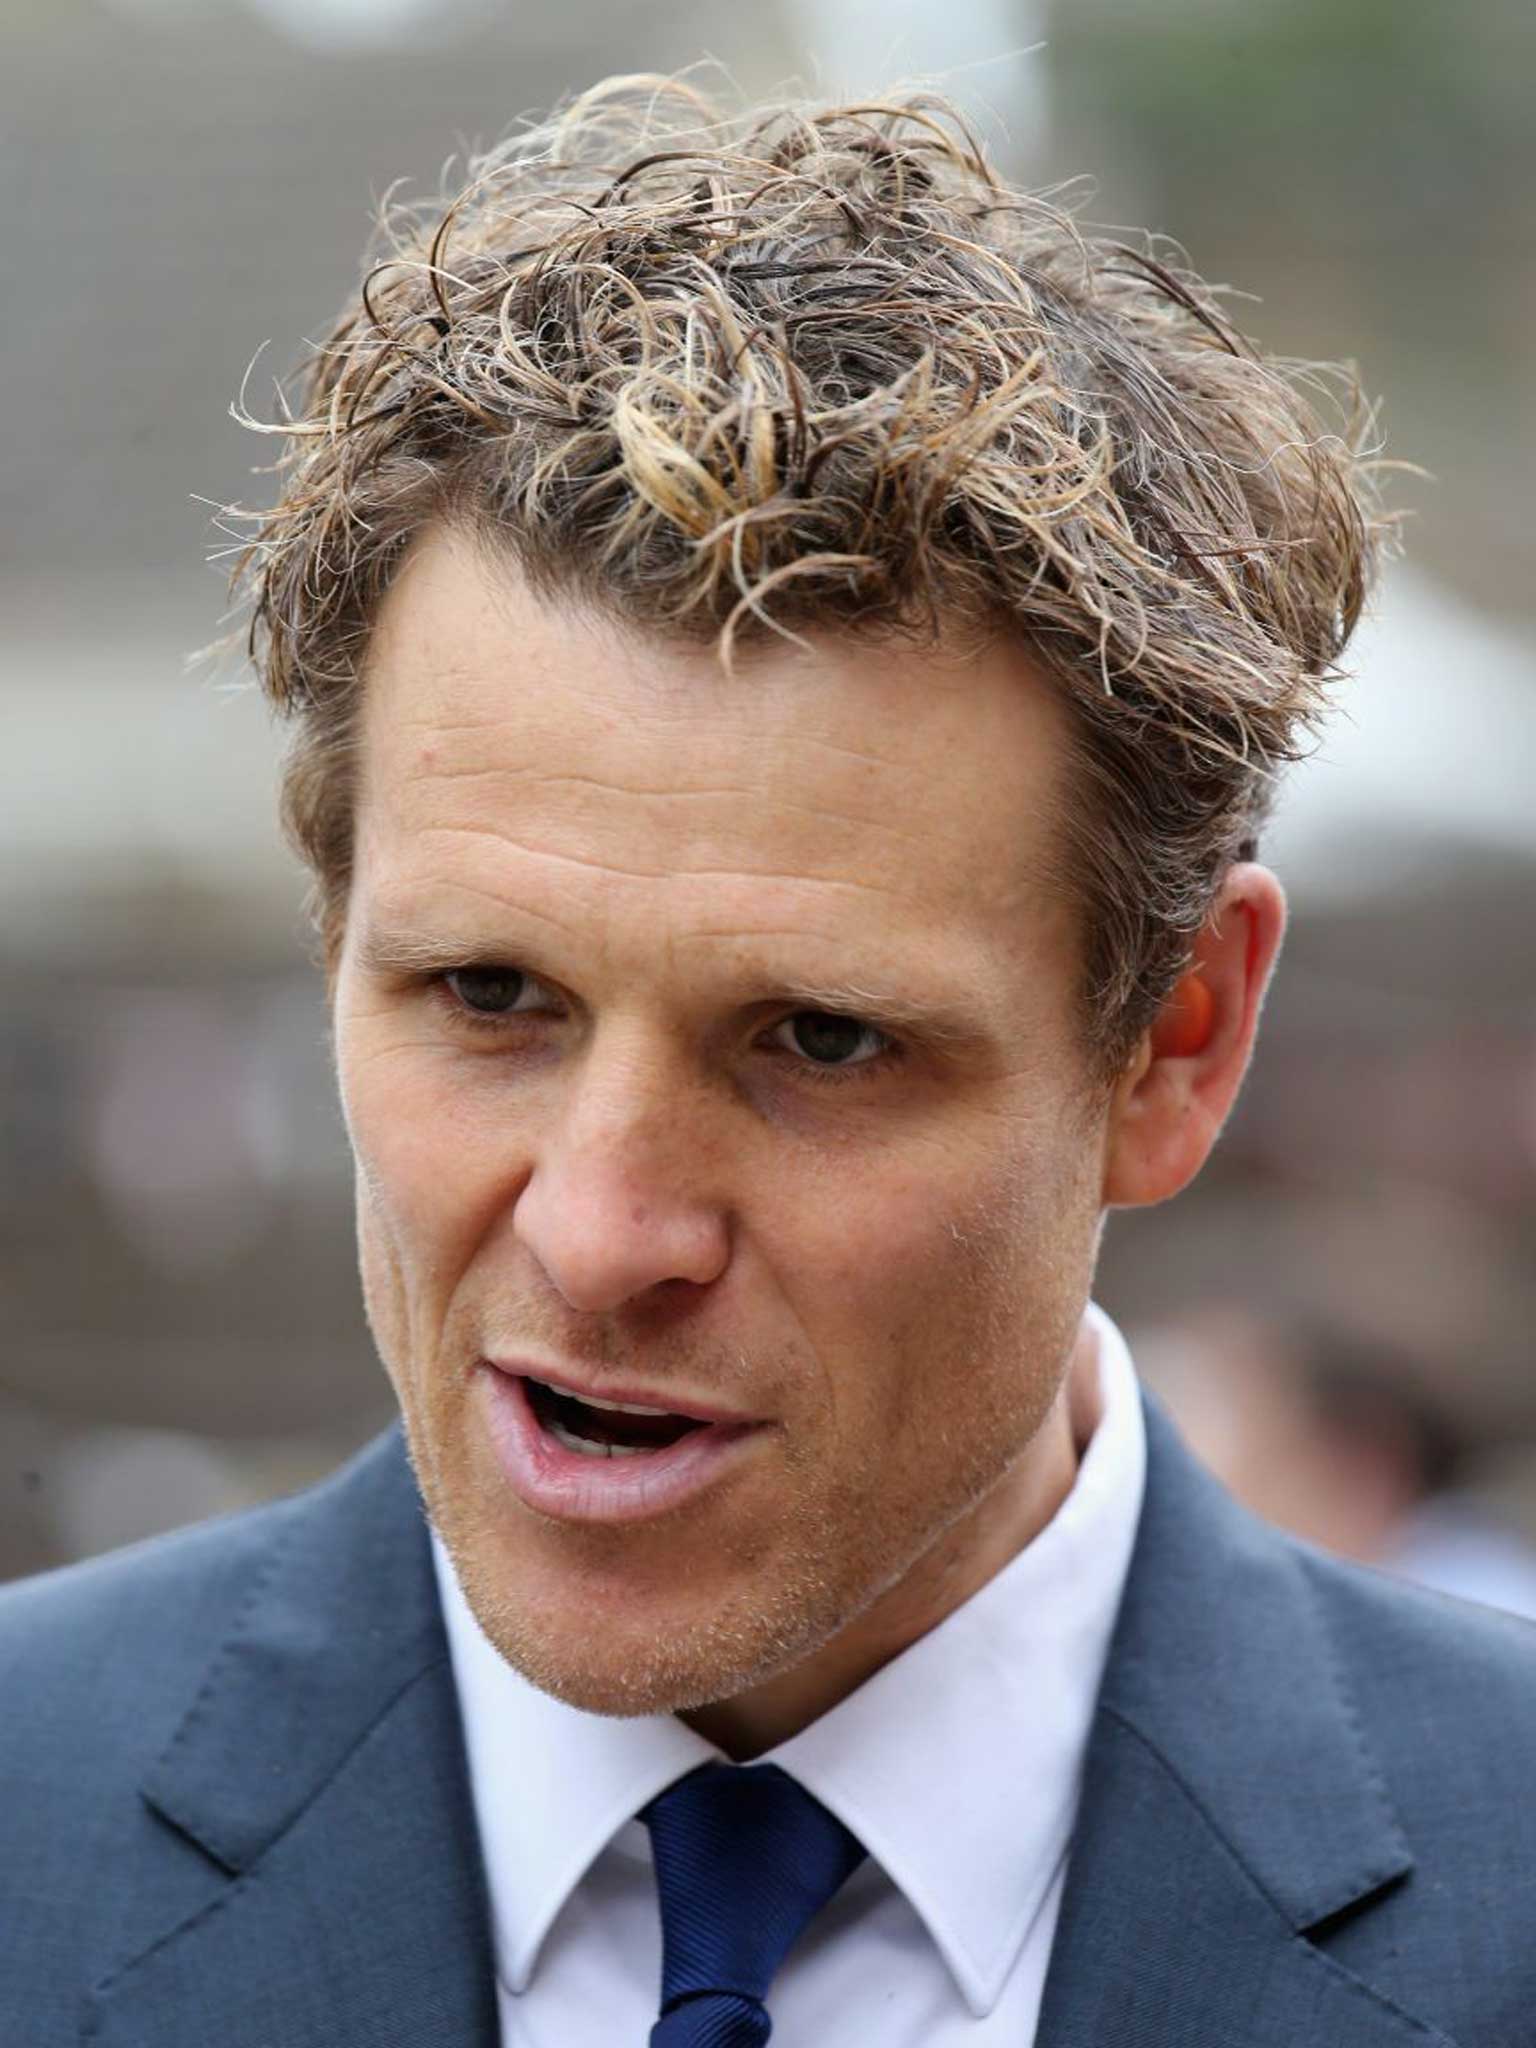 When James Cracknell woke up after his horrific accident his personality had changed irrevocably